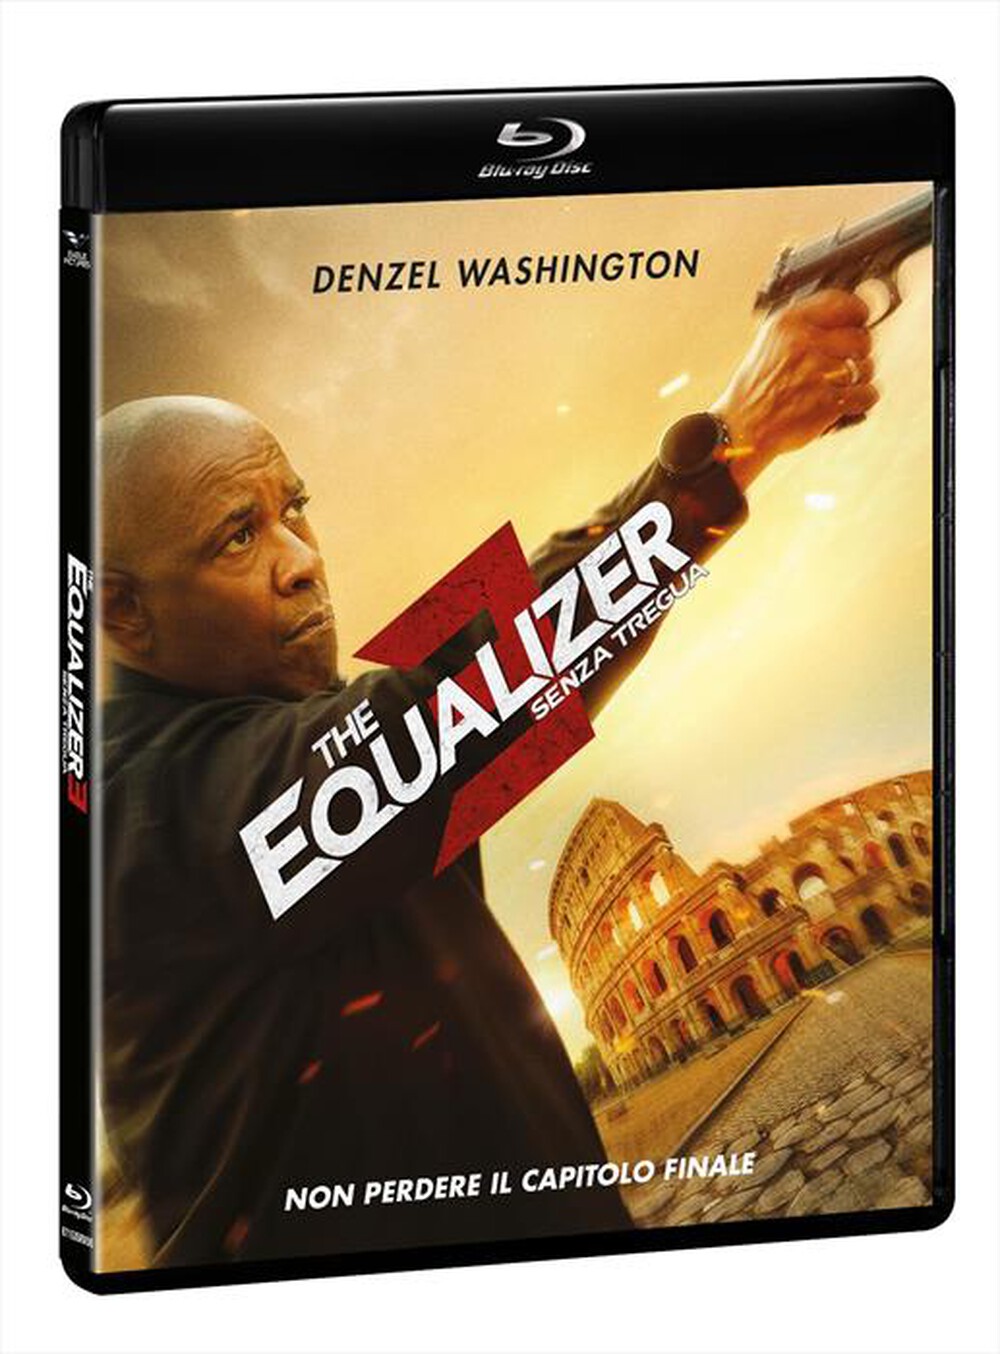 "SONY PICTURES - Equalizer 3 (The) - Senza Tregua"